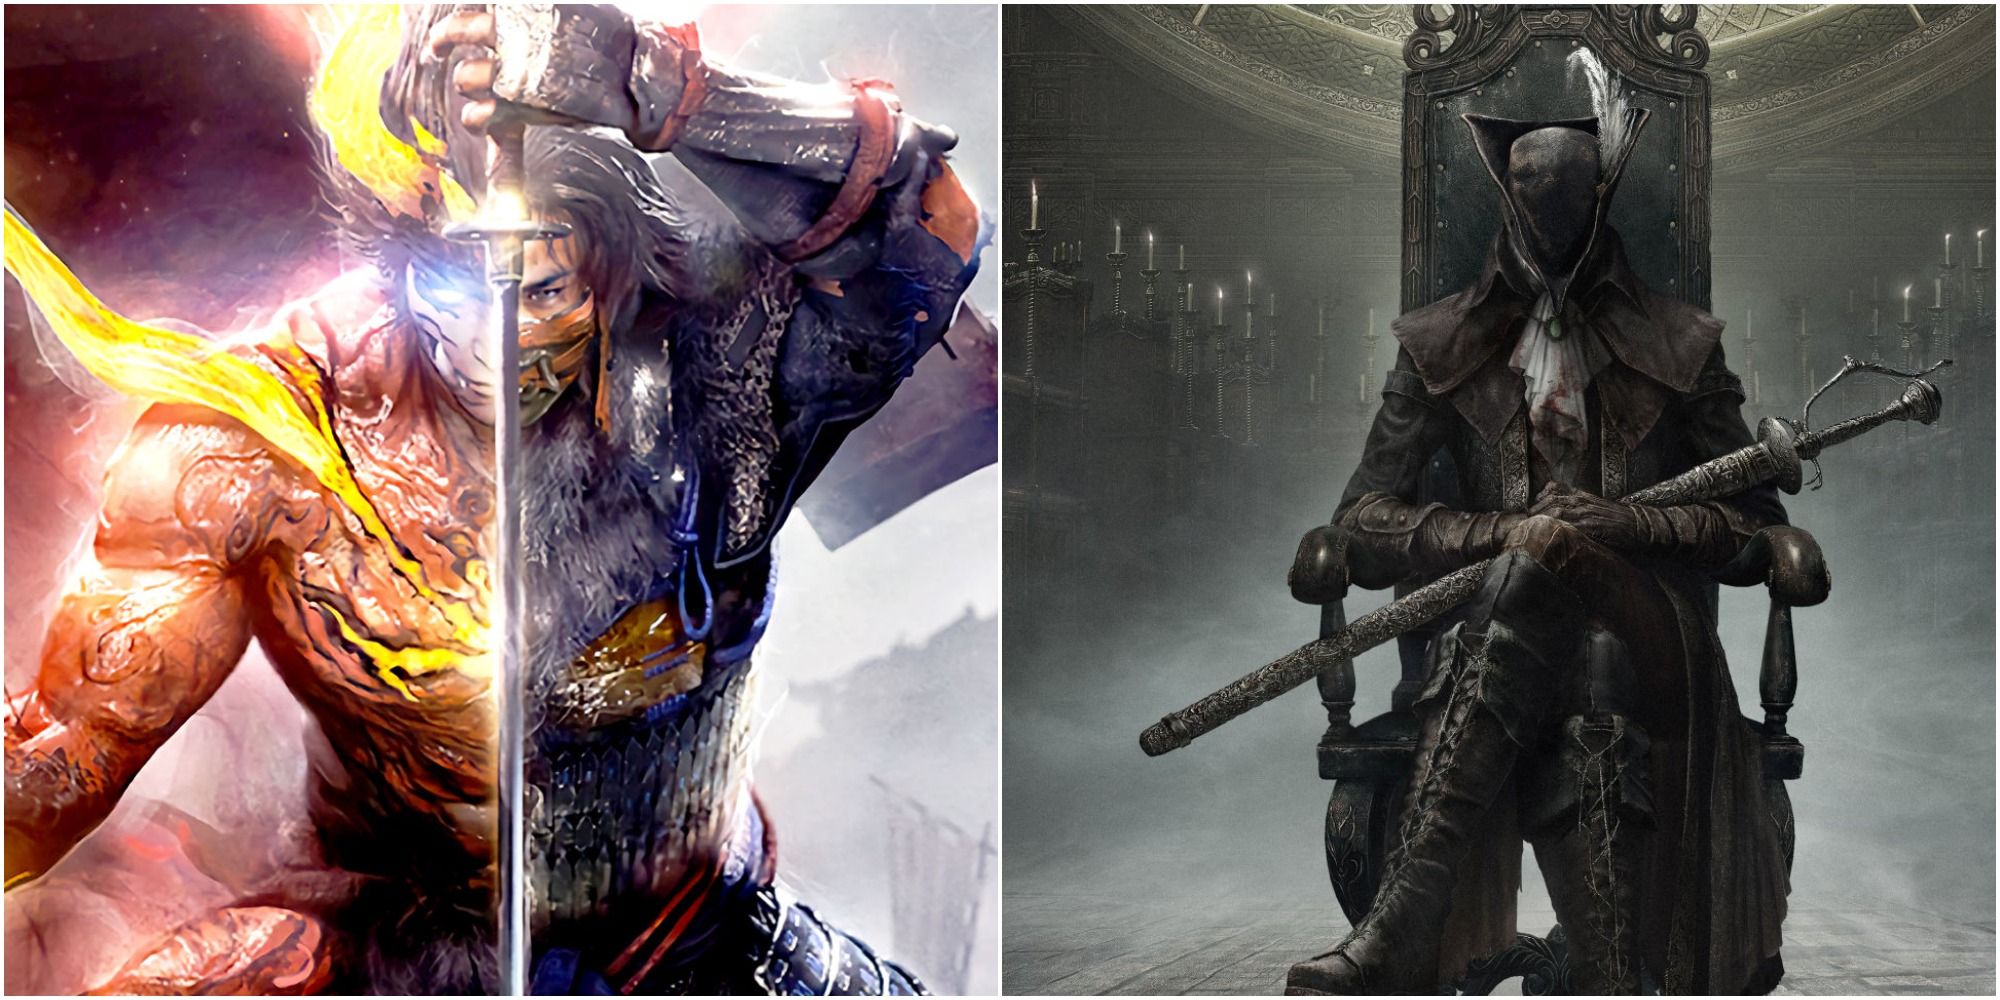 Cover art for Nioh 2 and Bloodborne: The Old Hunters DLC